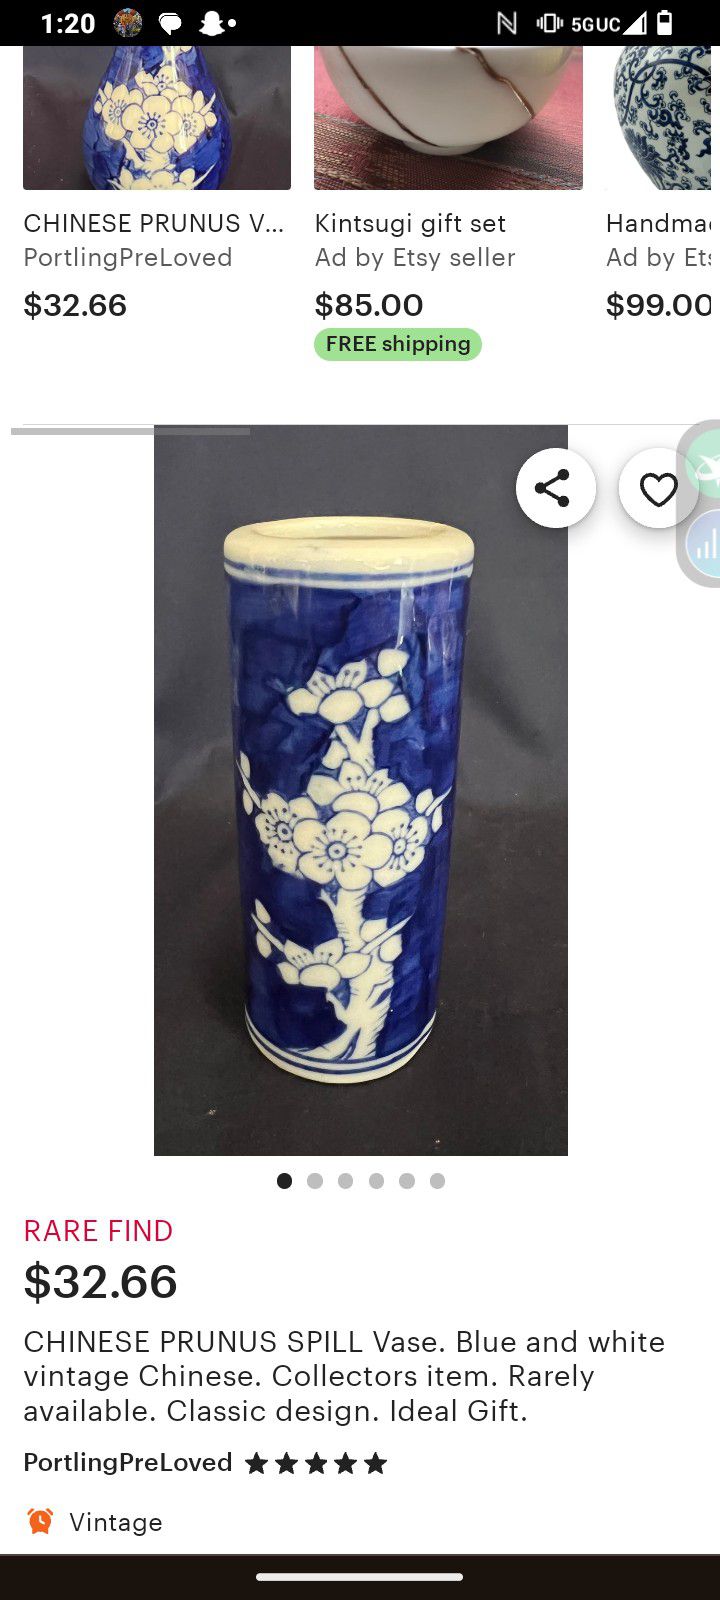 CHINESE PRUNUS SPILL Vase. Blue and white vintage Chinese. Collectors item. Rarely available. 